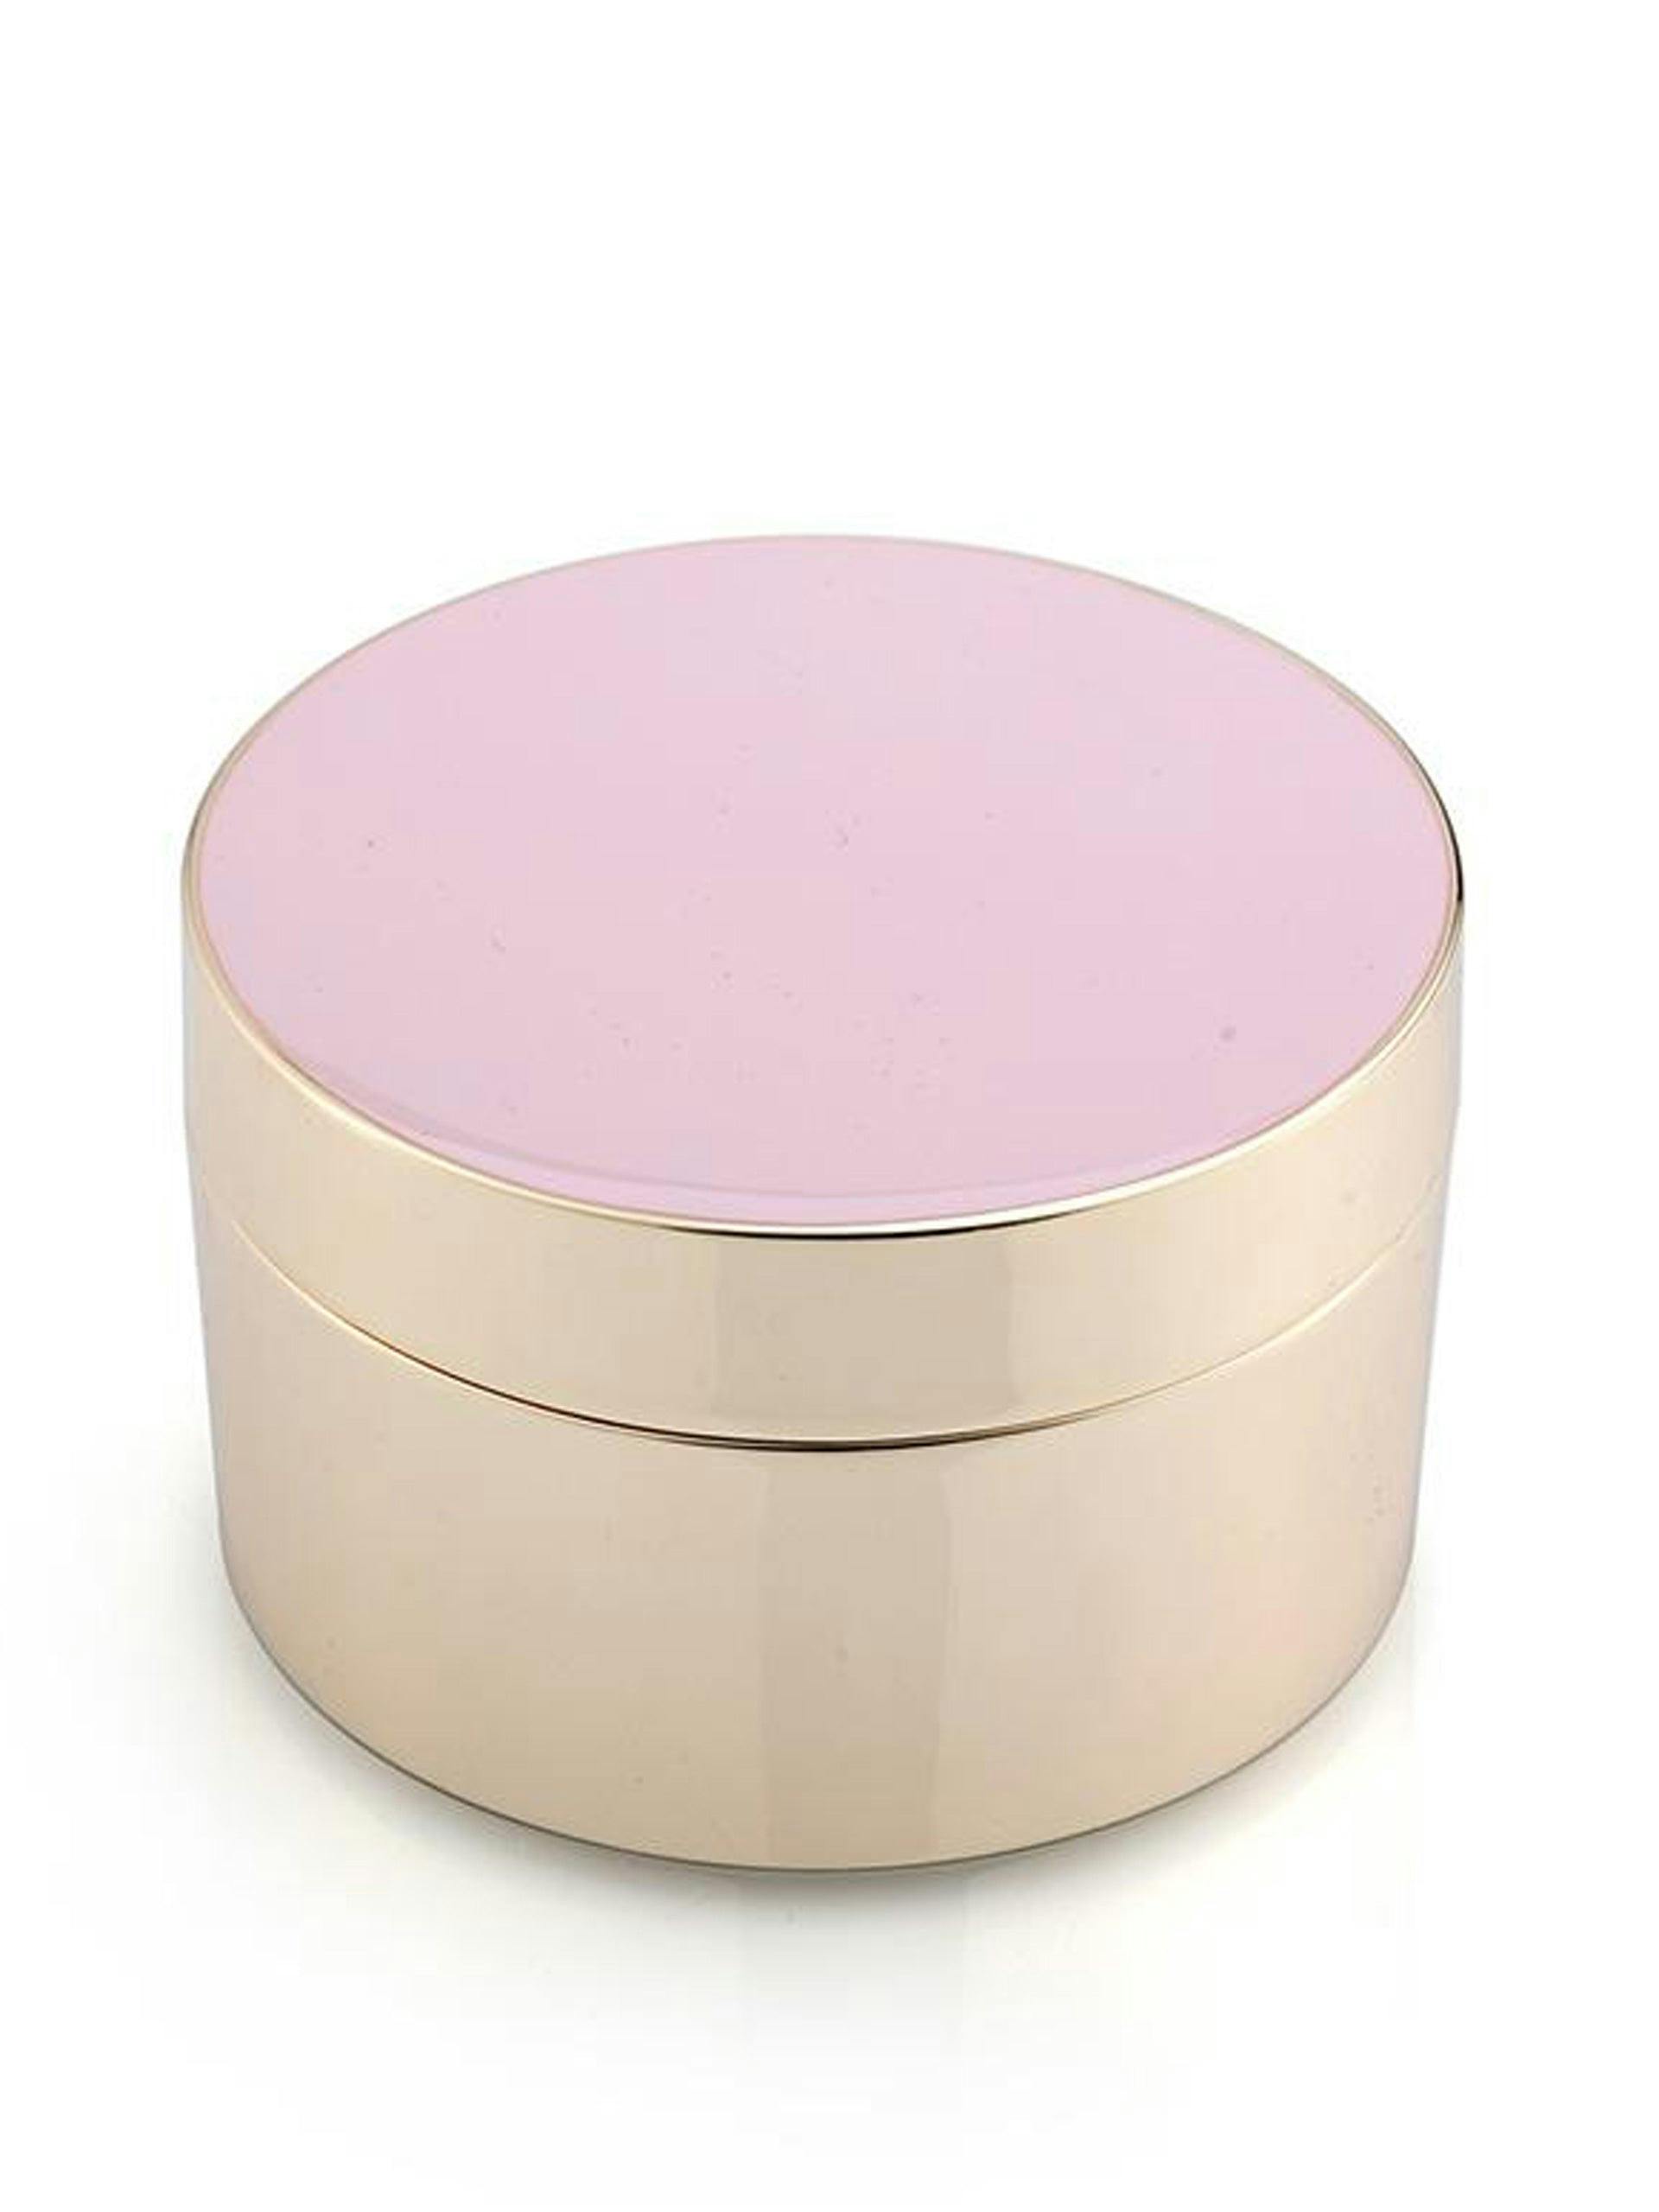 Pink and gold trinket pot